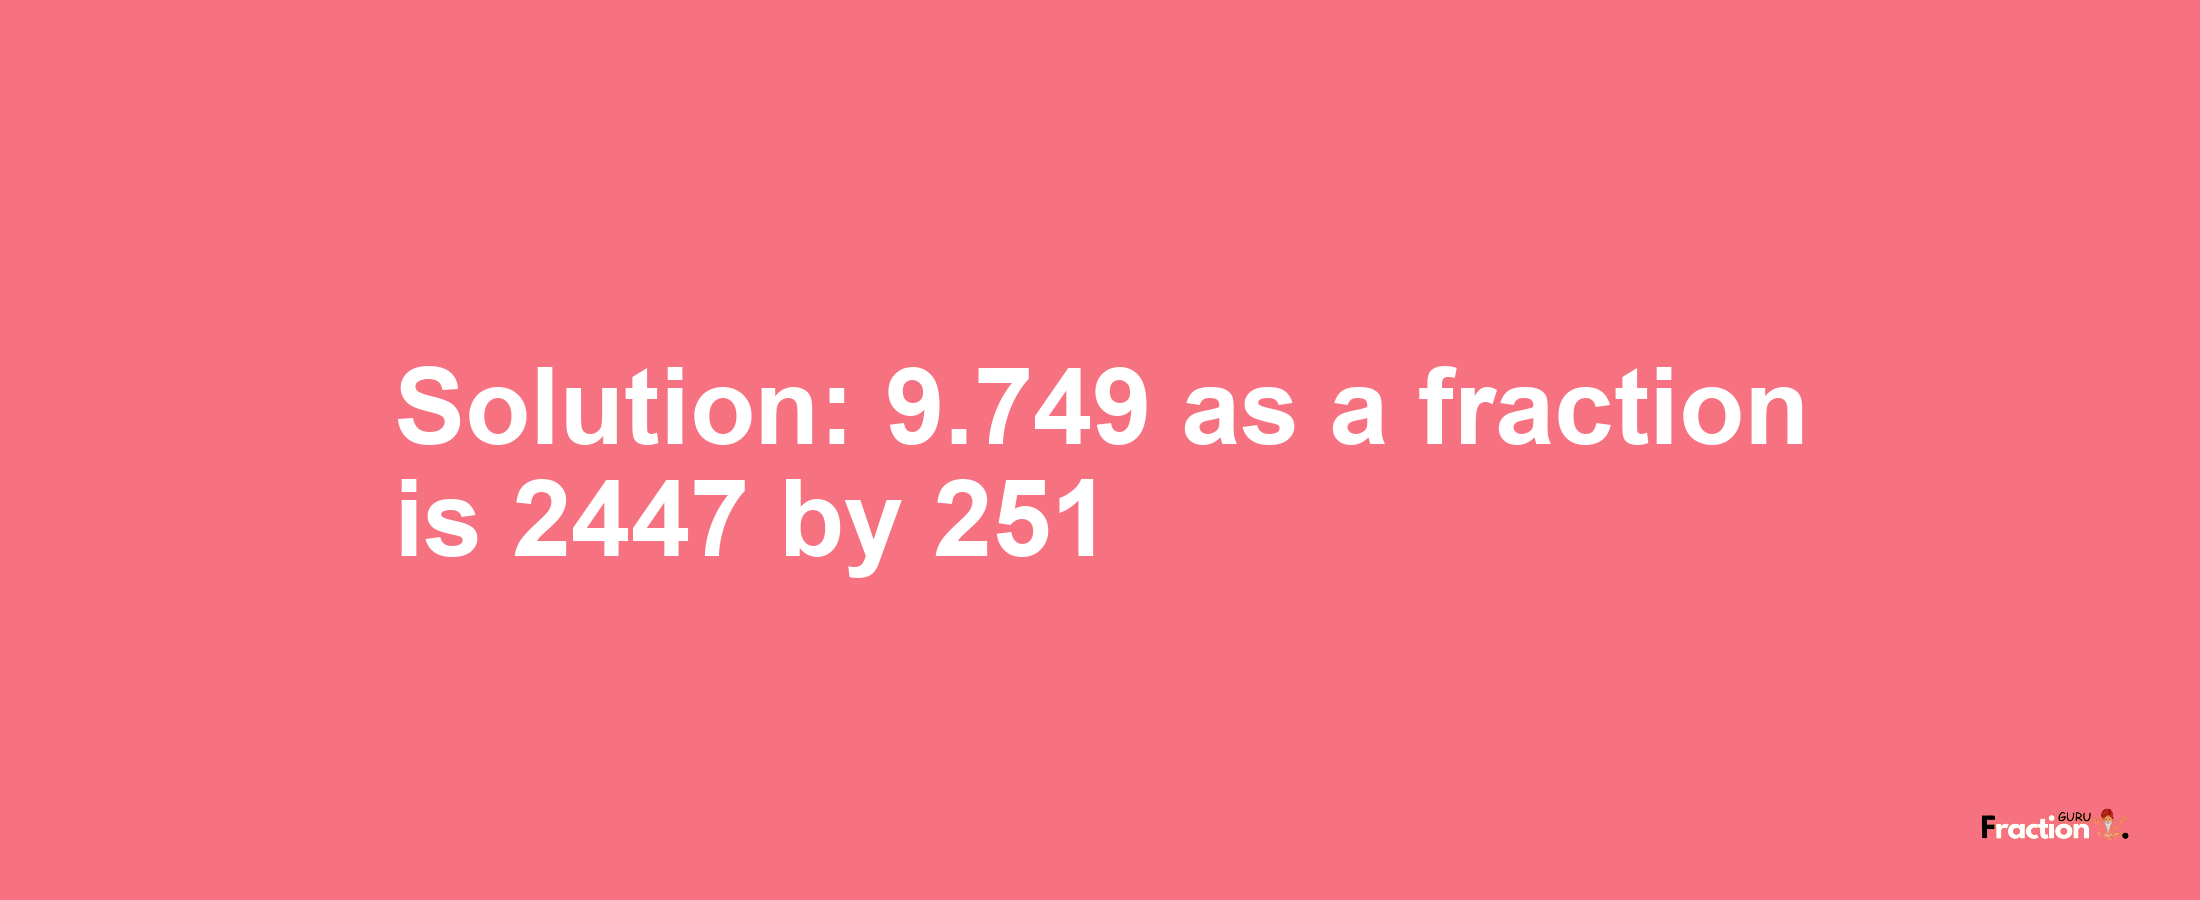 Solution:9.749 as a fraction is 2447/251